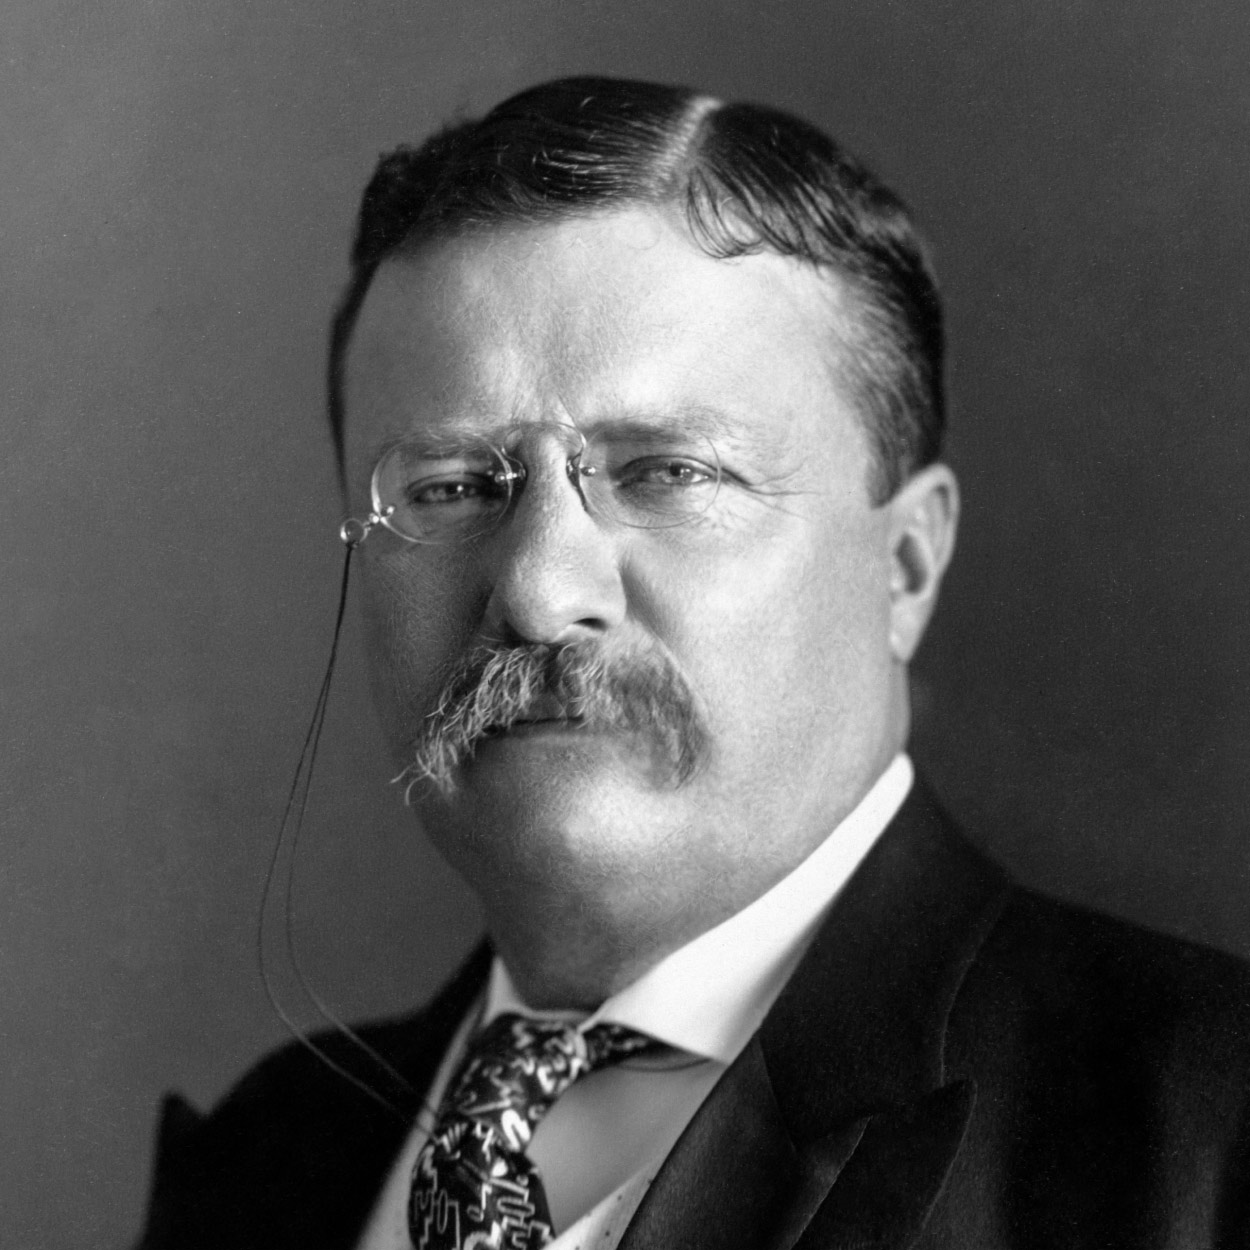 Portrait of Theodore Roosevelt, the 26th President of the United States